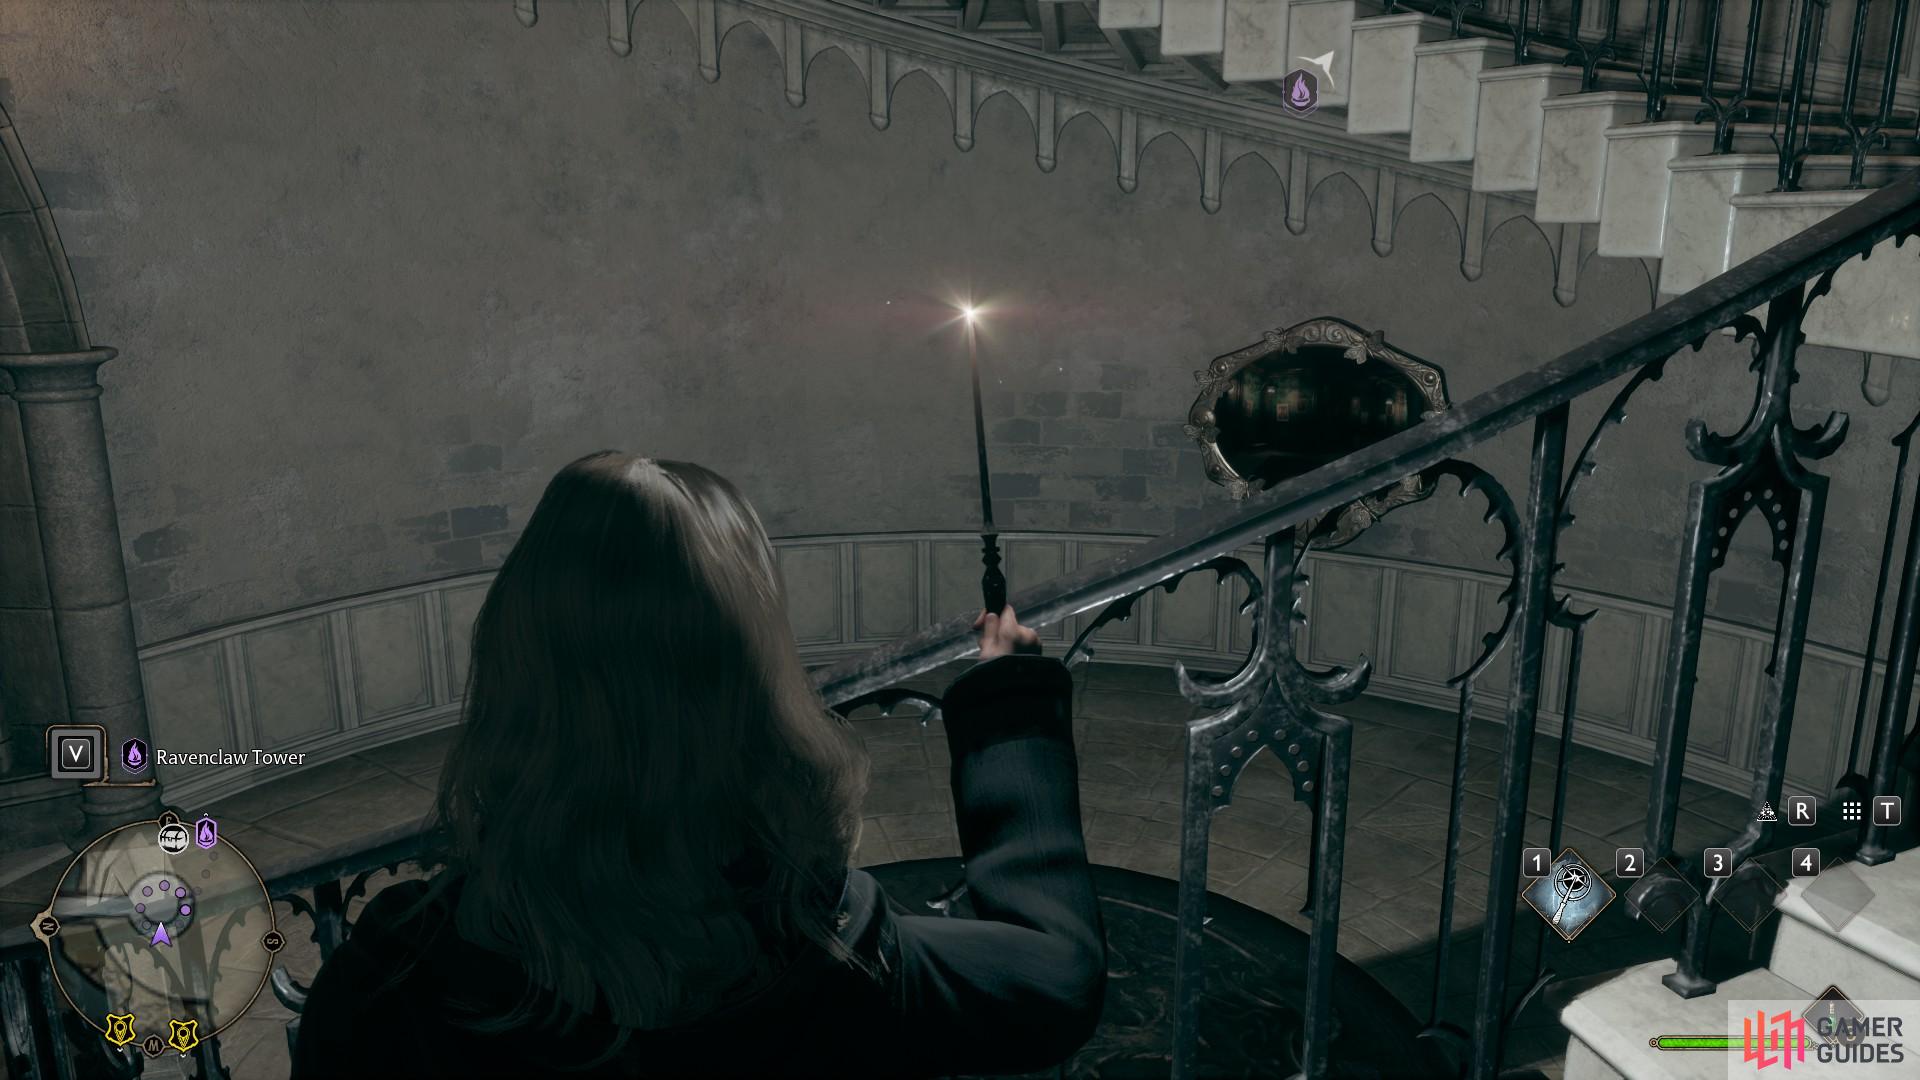 The Moth Mirror is at the very bottom of the Ravenclaw spire.